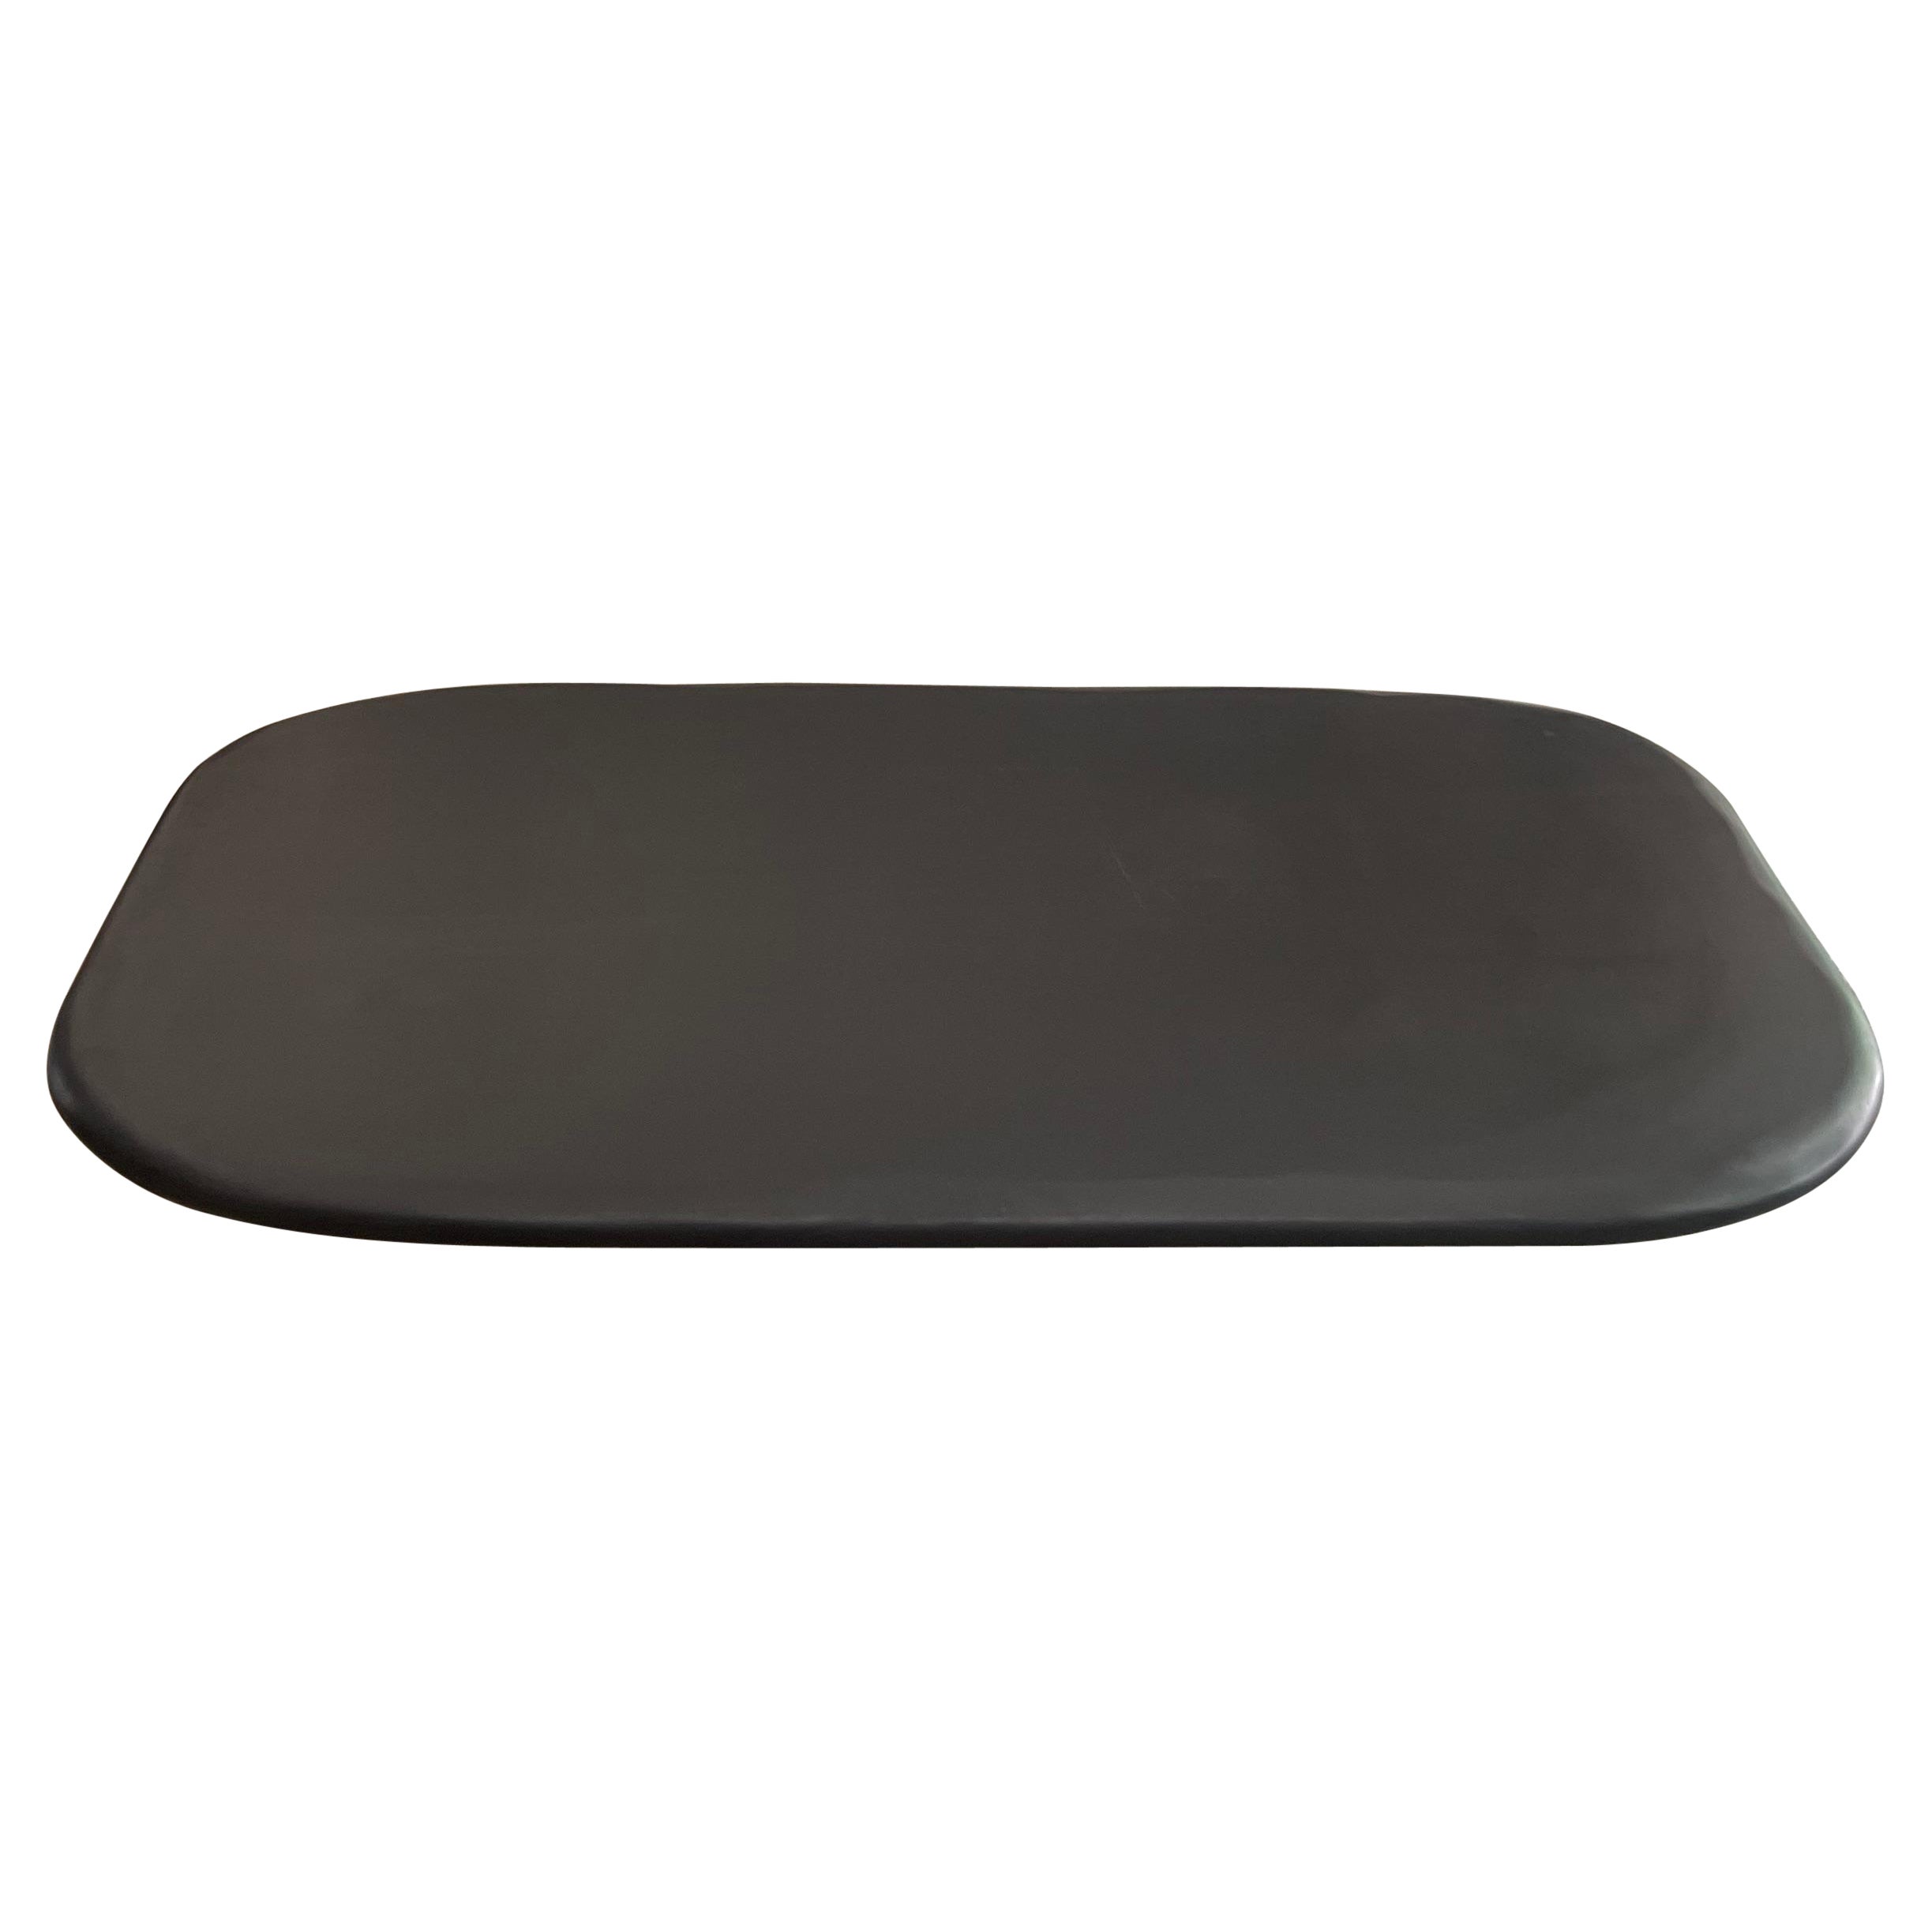 Pebble Table, Matte Black Stone Table with Rounded Edge and Base